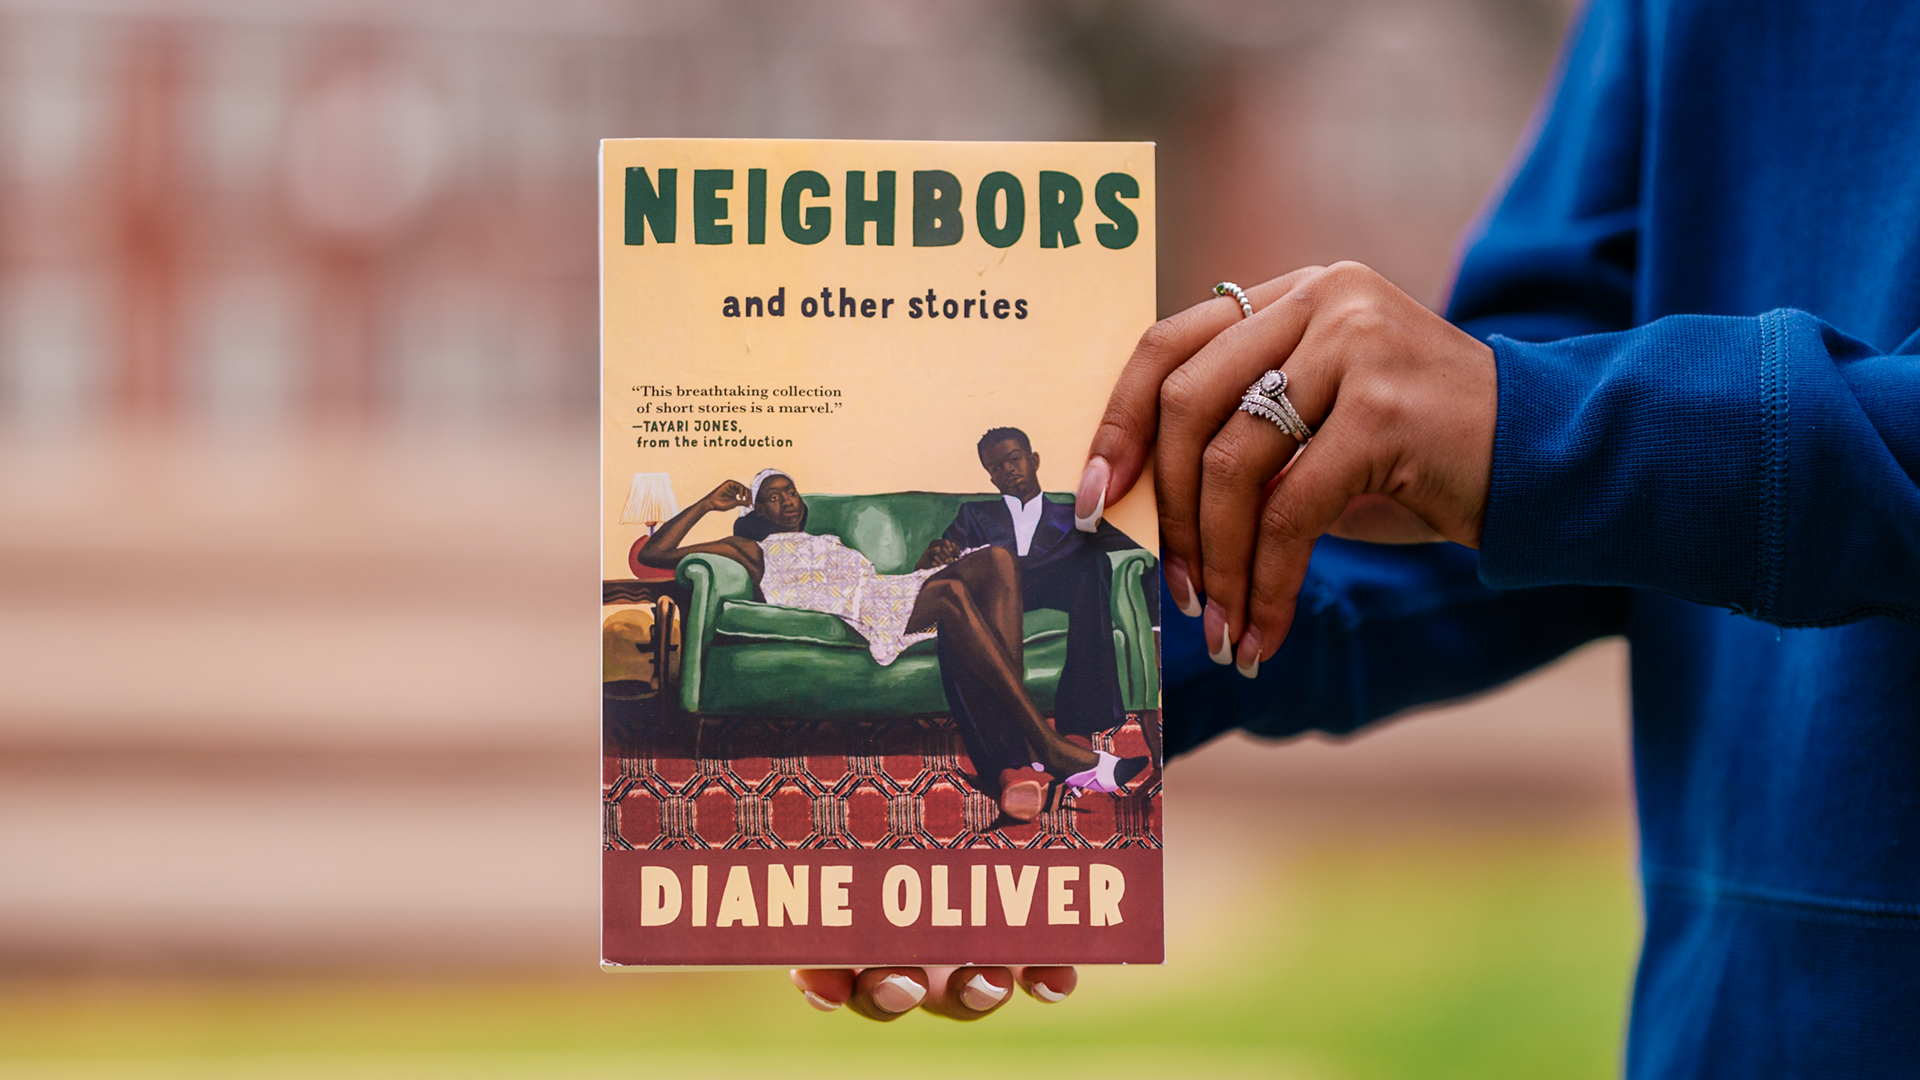 Hands holding copy of book by Diane Oliver, "Neighbors and Other Short Stories"